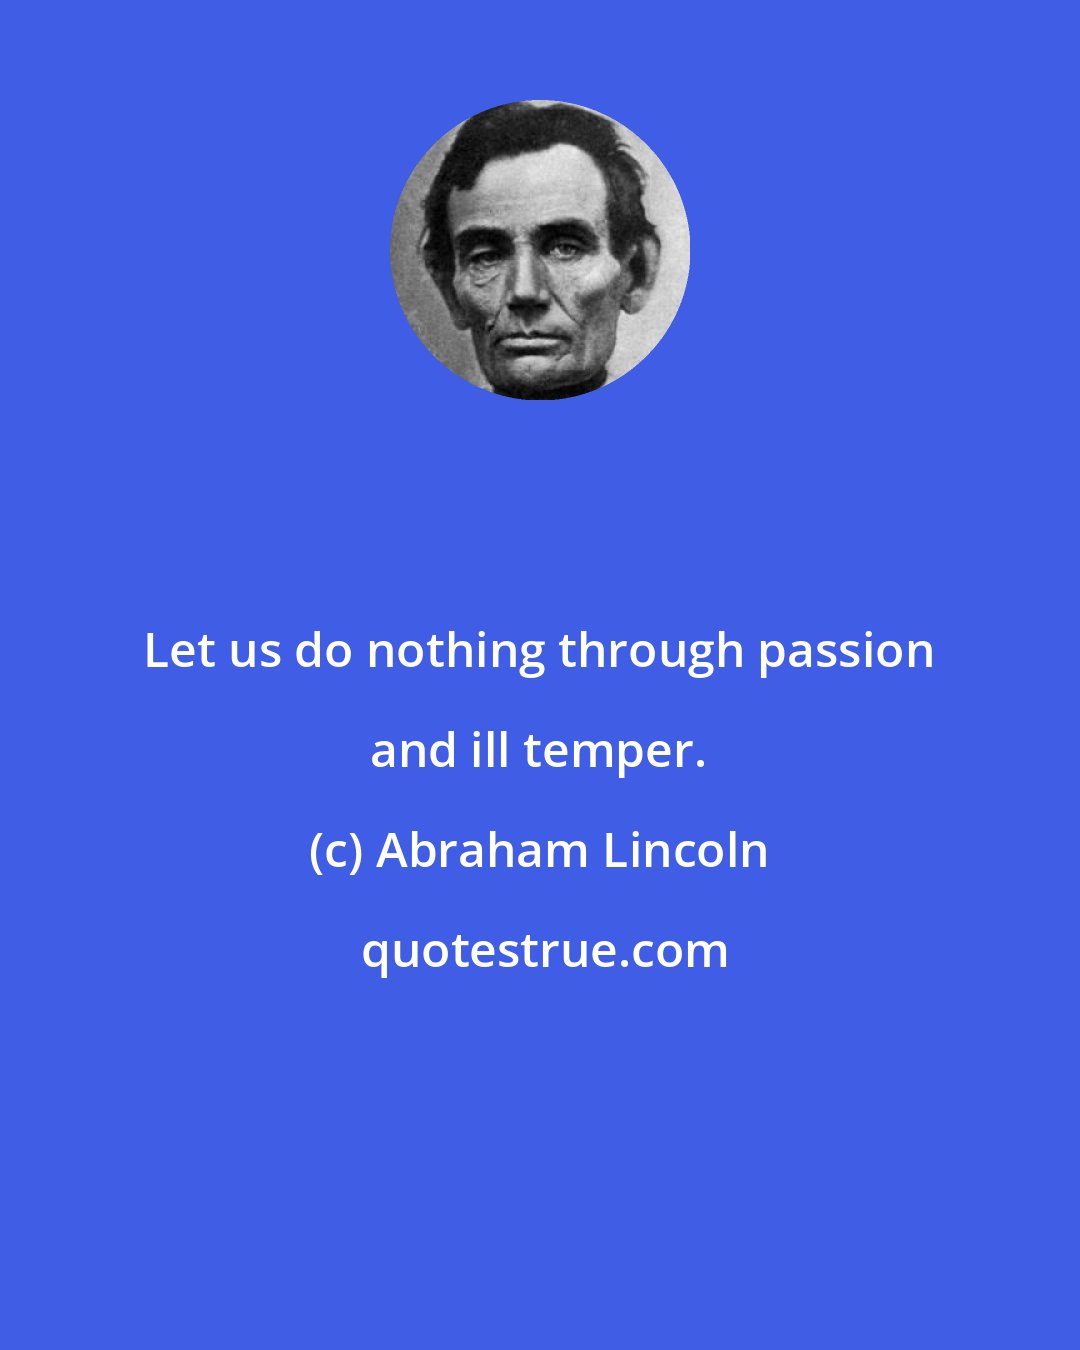 Abraham Lincoln: Let us do nothing through passion and ill temper.